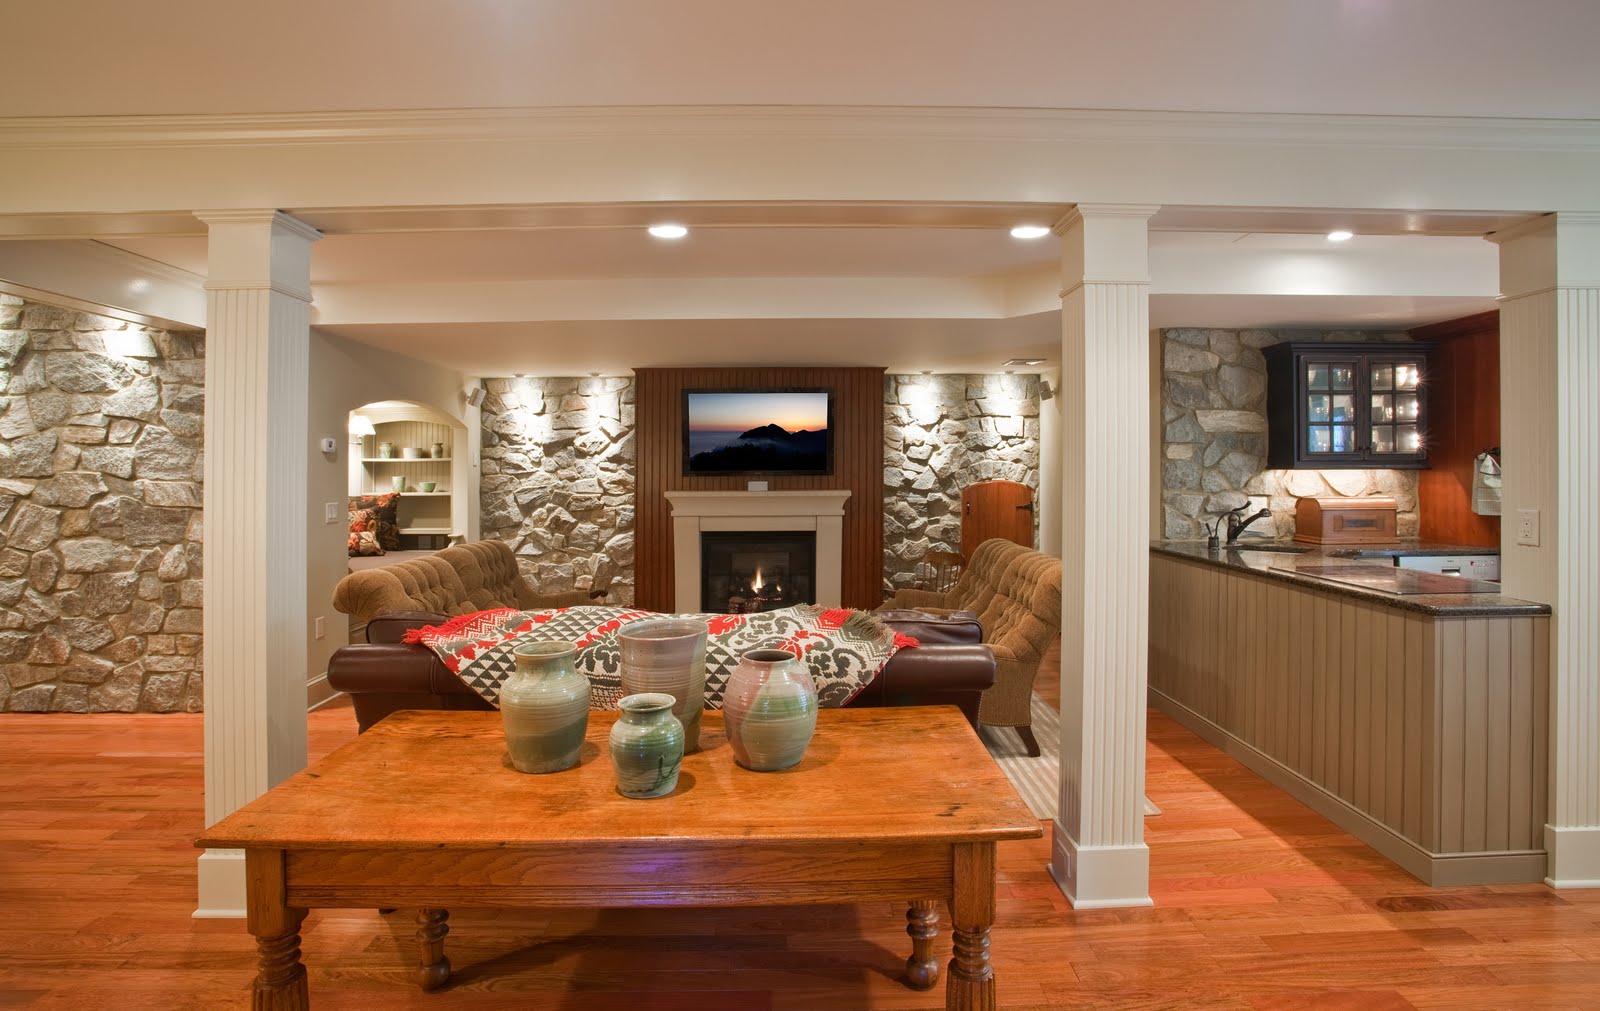 Gracious Interiors: Basement Becomes Lower-Level Suite